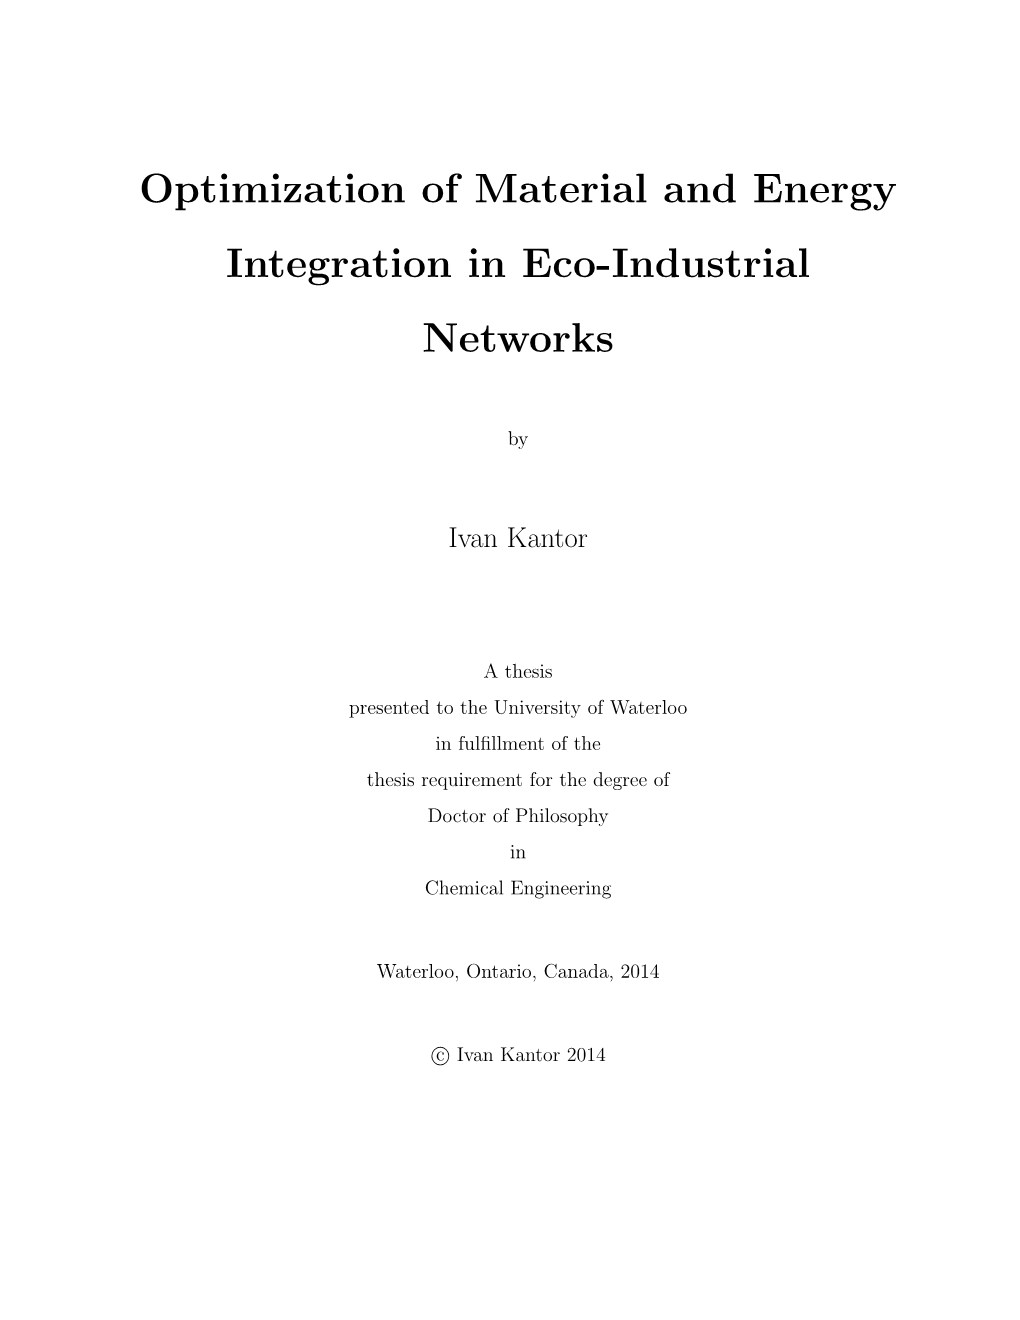 Optimization of Material and Energy Integration in Eco-Industrial Networks